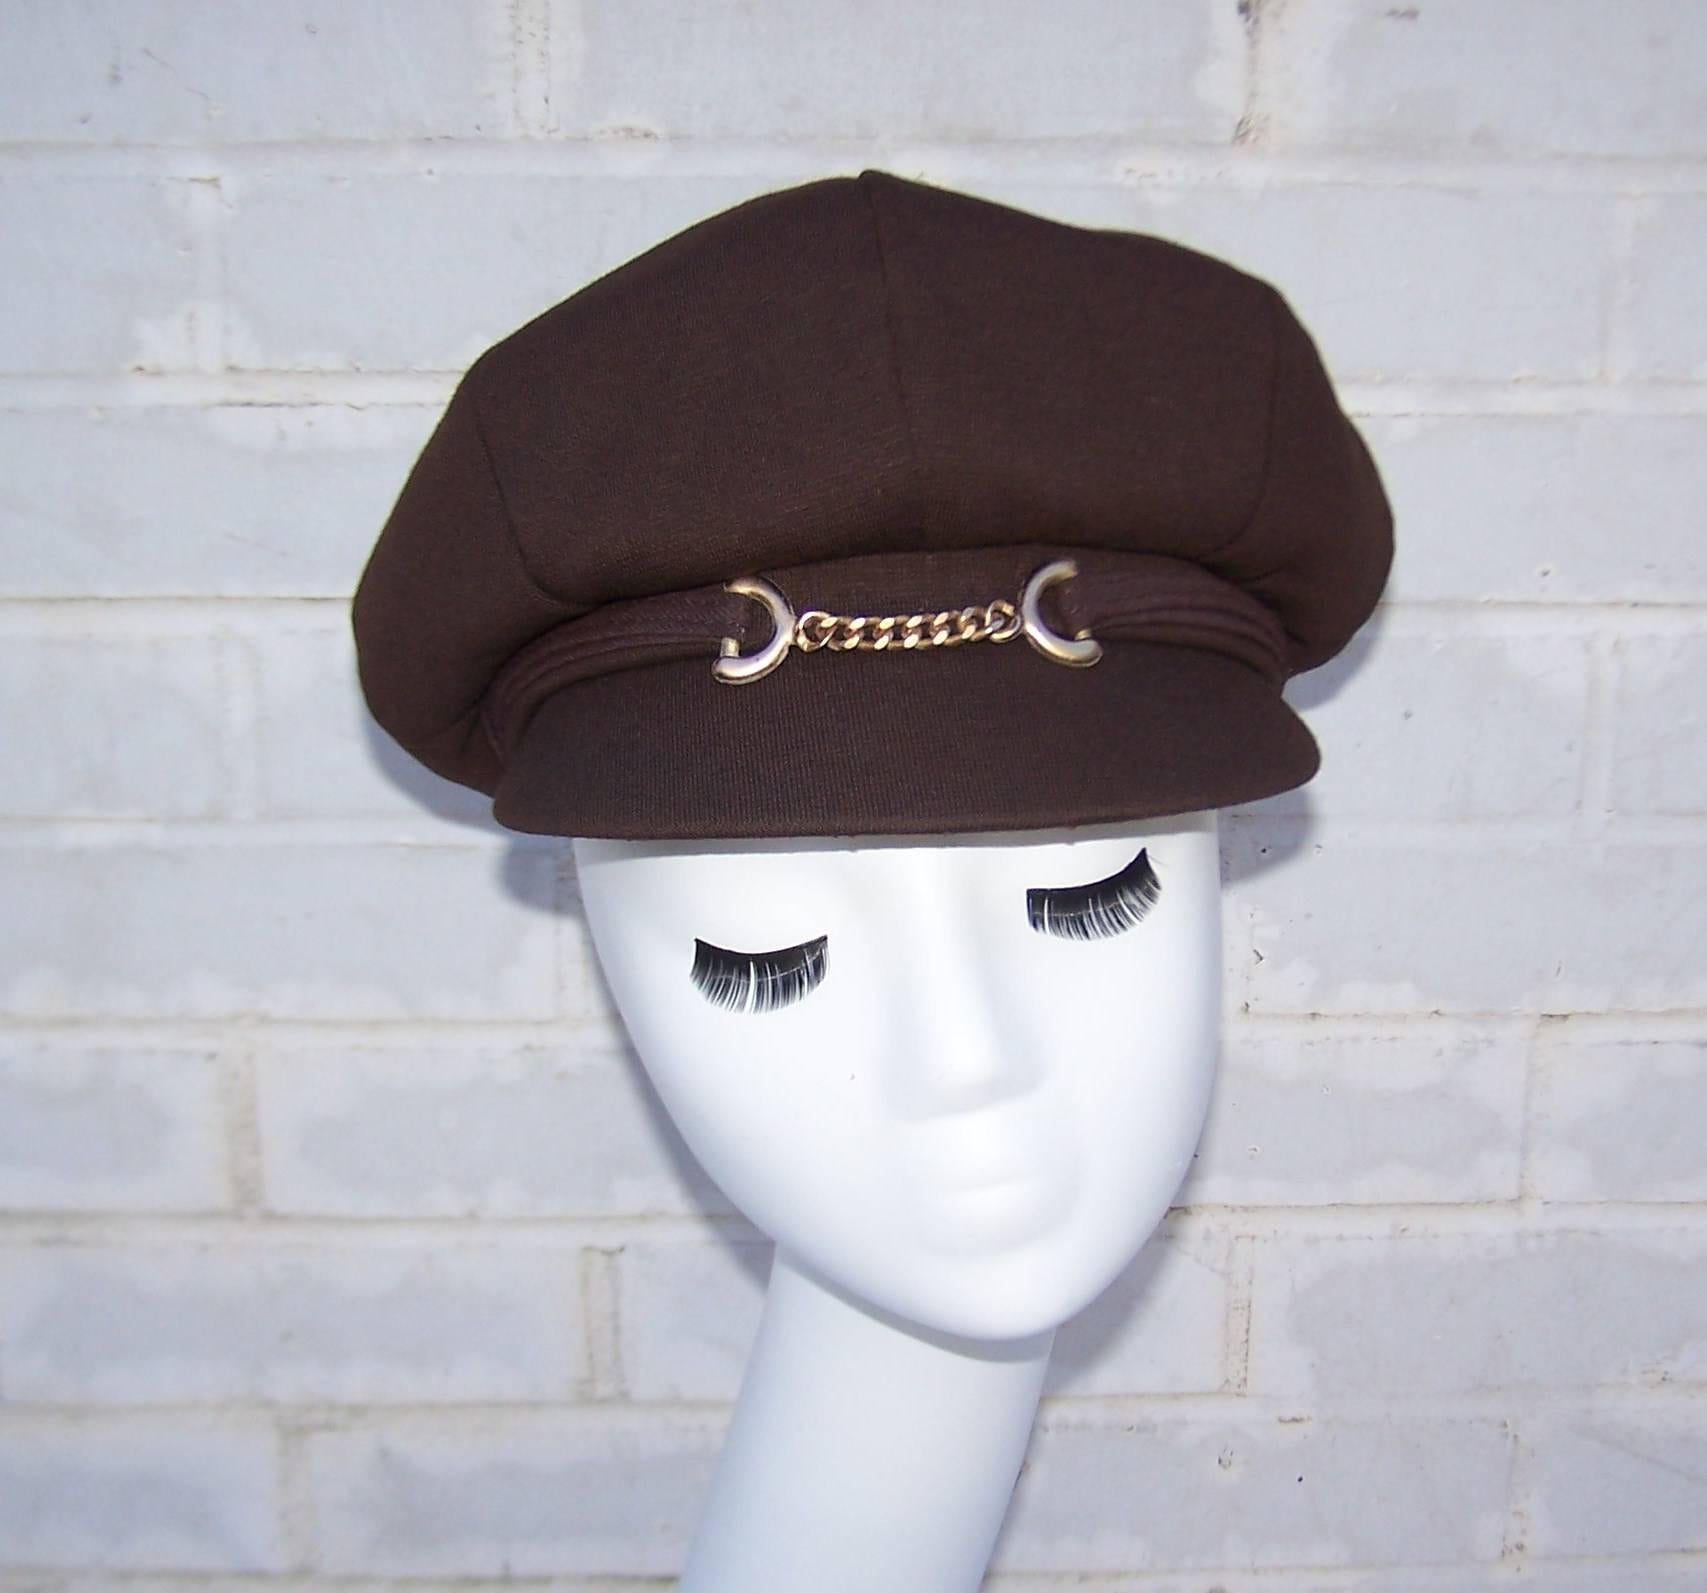 Black Extra! Extra! C.1970 Mod Newsboy Style Brown Wool Knit Hat 